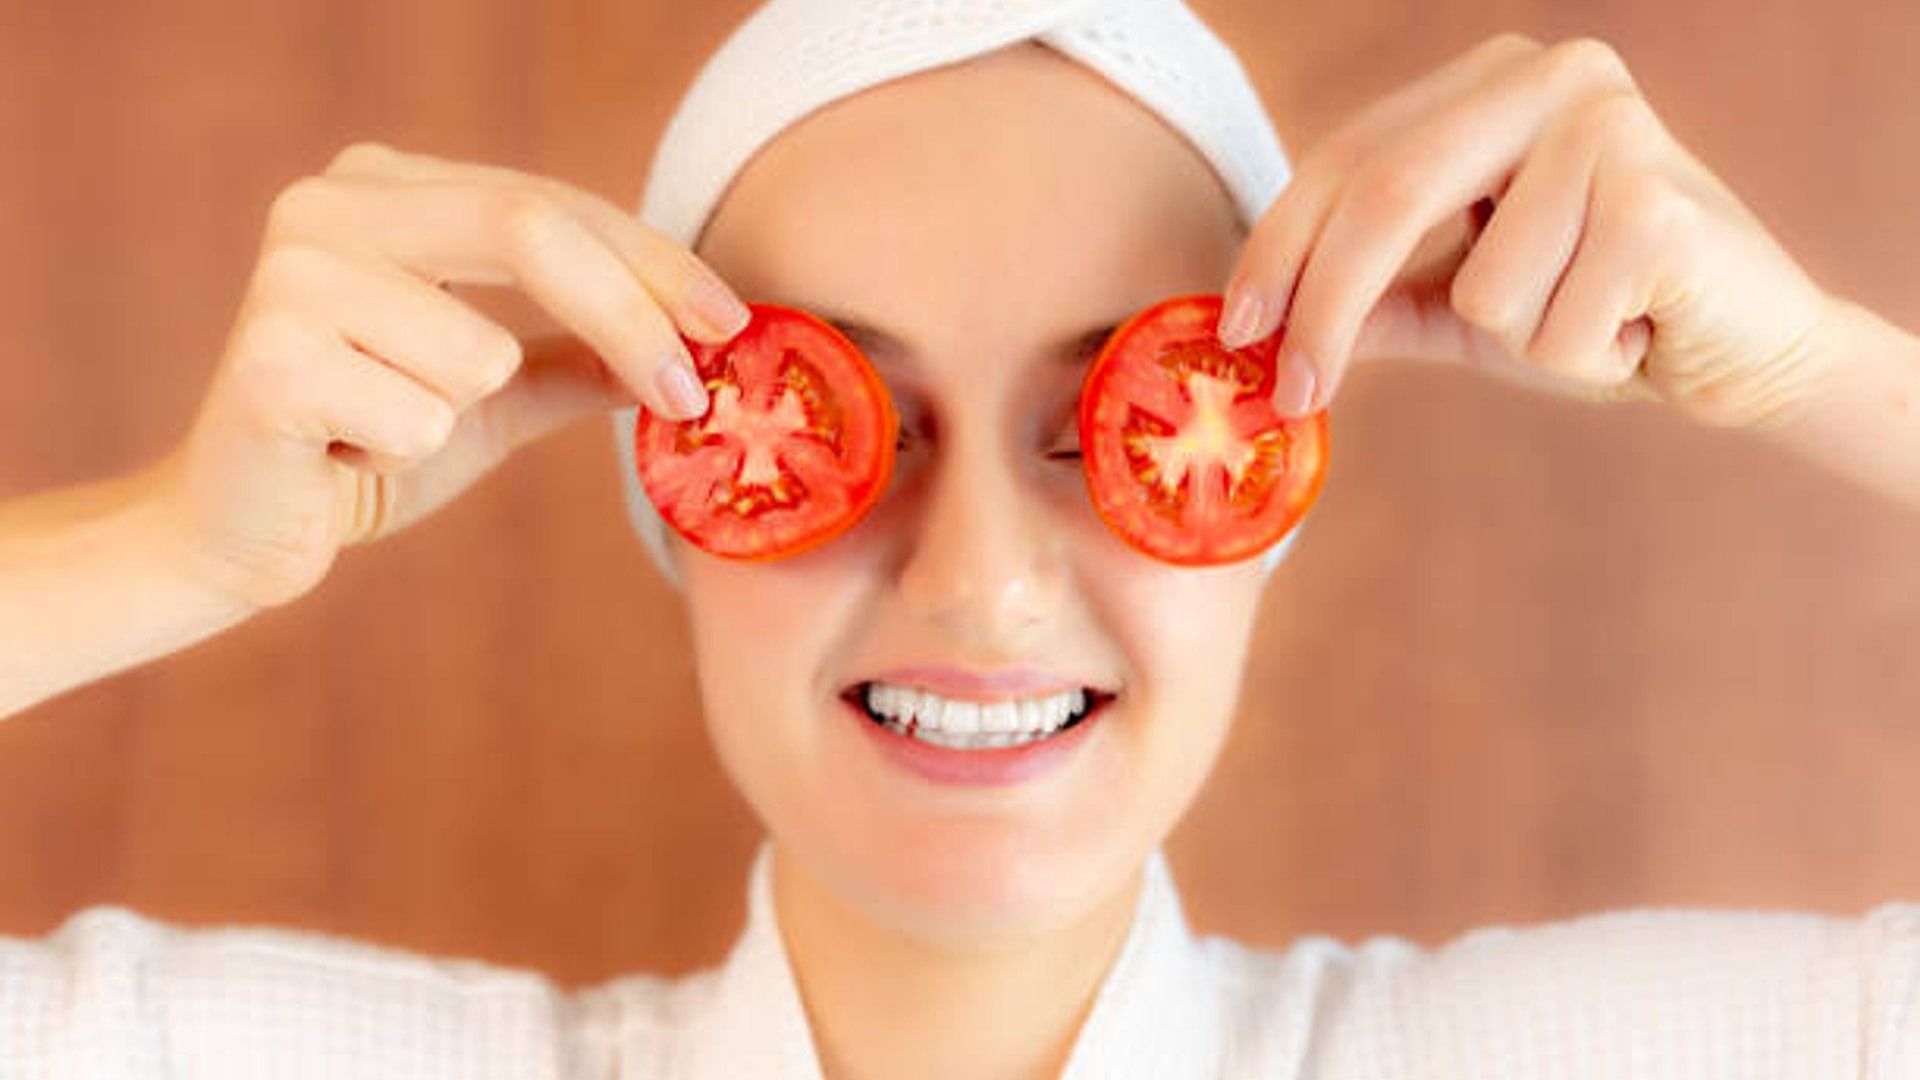 Chehre Par Tamatar Kaise Lagaye: How to Apply Tomato on Face for Glowing Skin